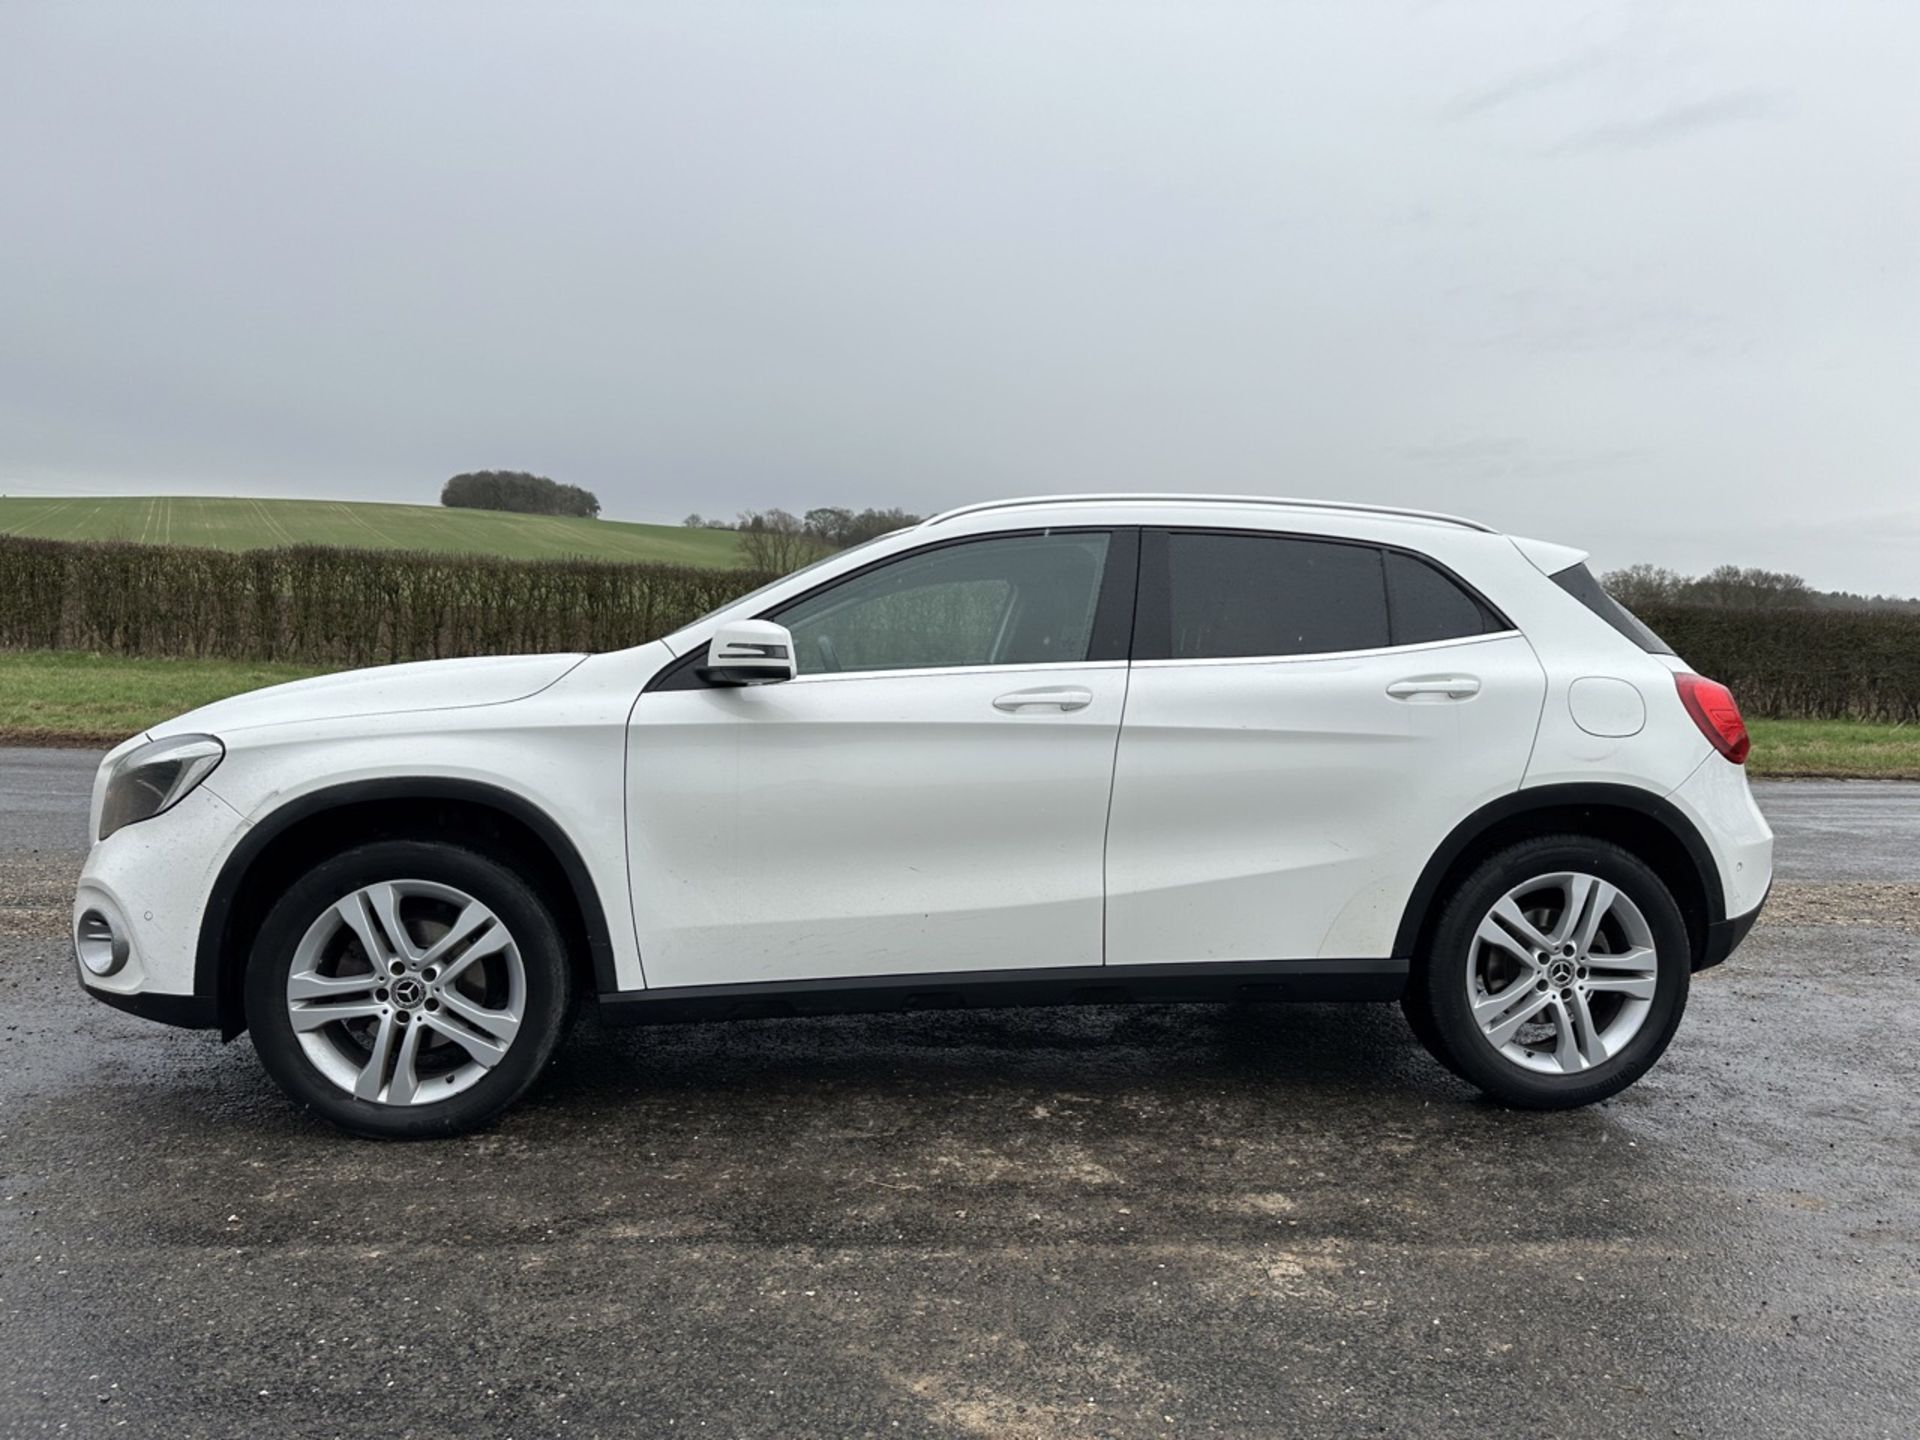 MERCEDES-BENZ GLA 200d “Automatic” Sport Executive 5dr - (2019 Model) *HIGH SPEC* 79k Miles Only - Image 8 of 24